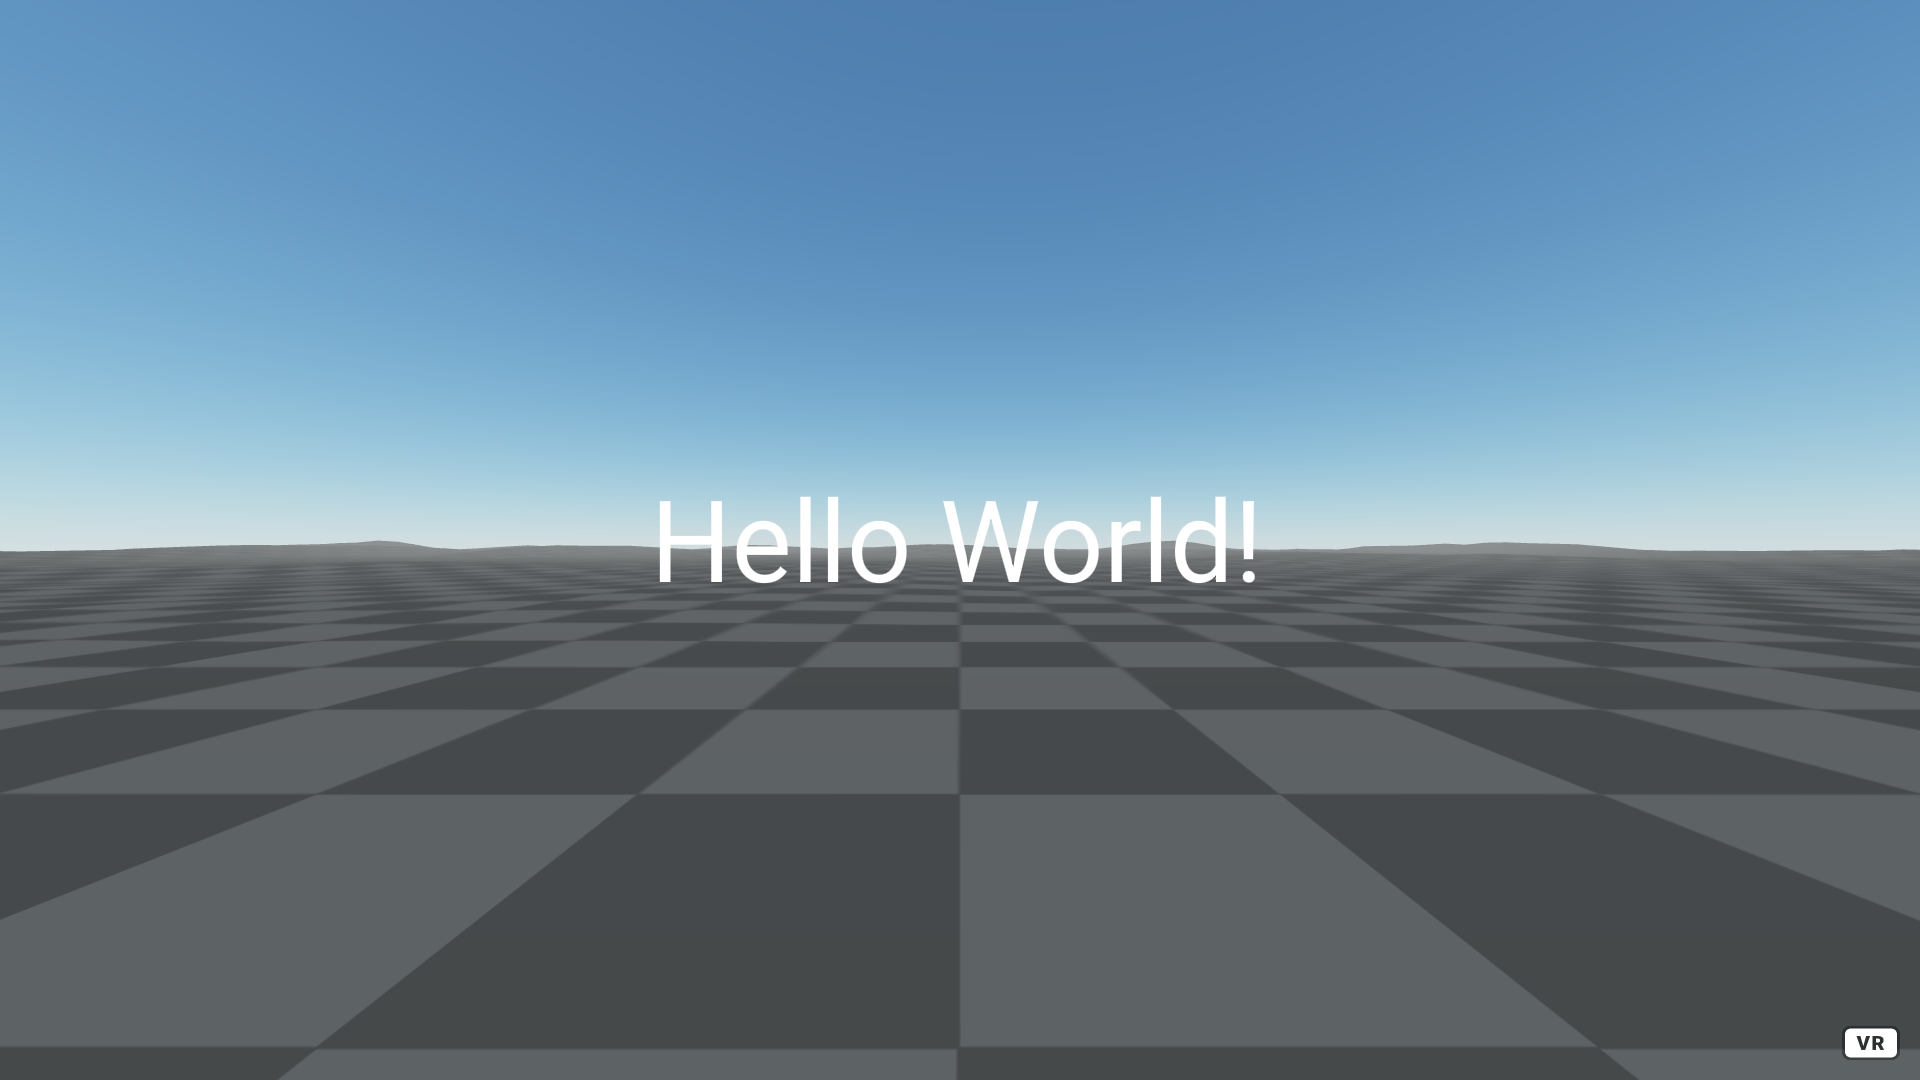 An A-Frame scene that says Hello World!